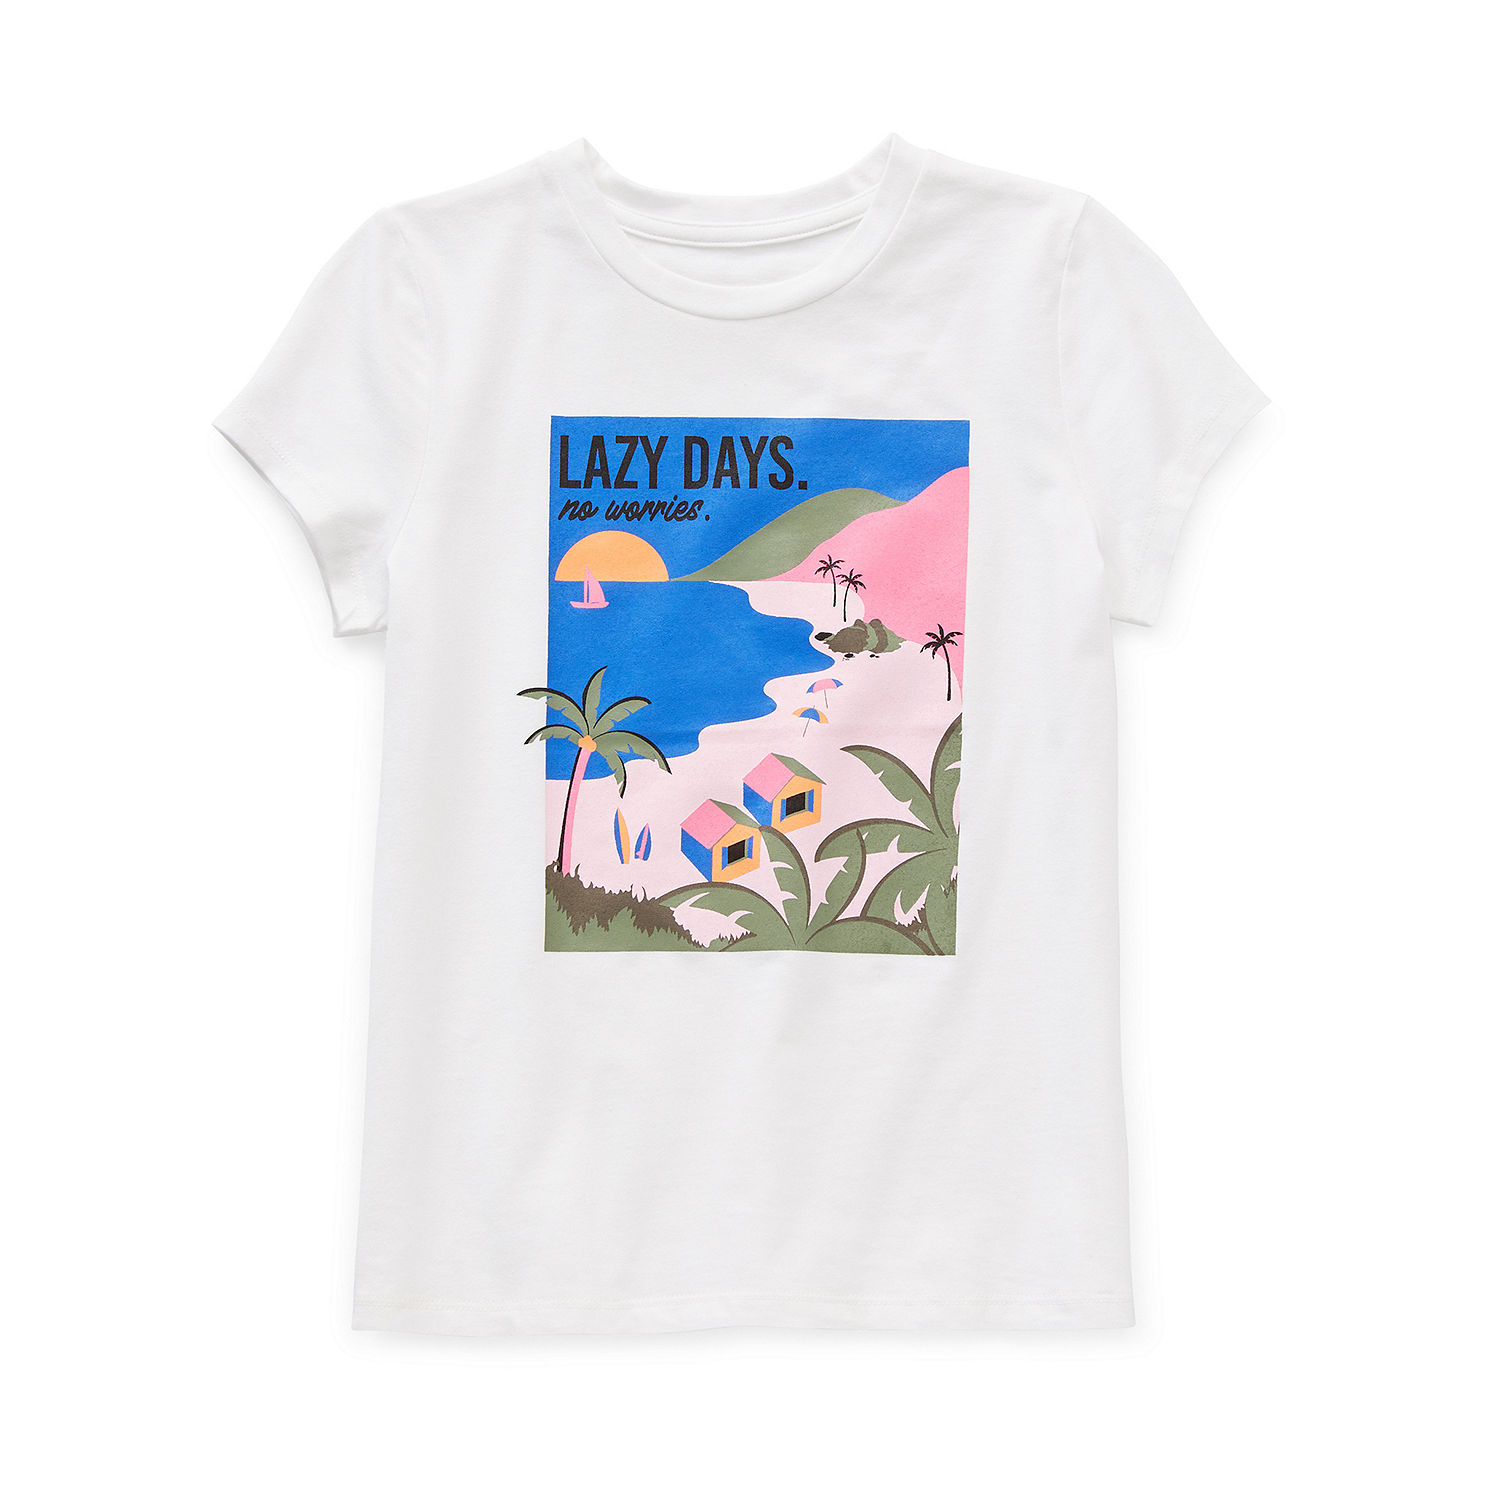 Thereabouts Little & Big Girls Round Neck Short Sleeve Graphic T-Shirt ...